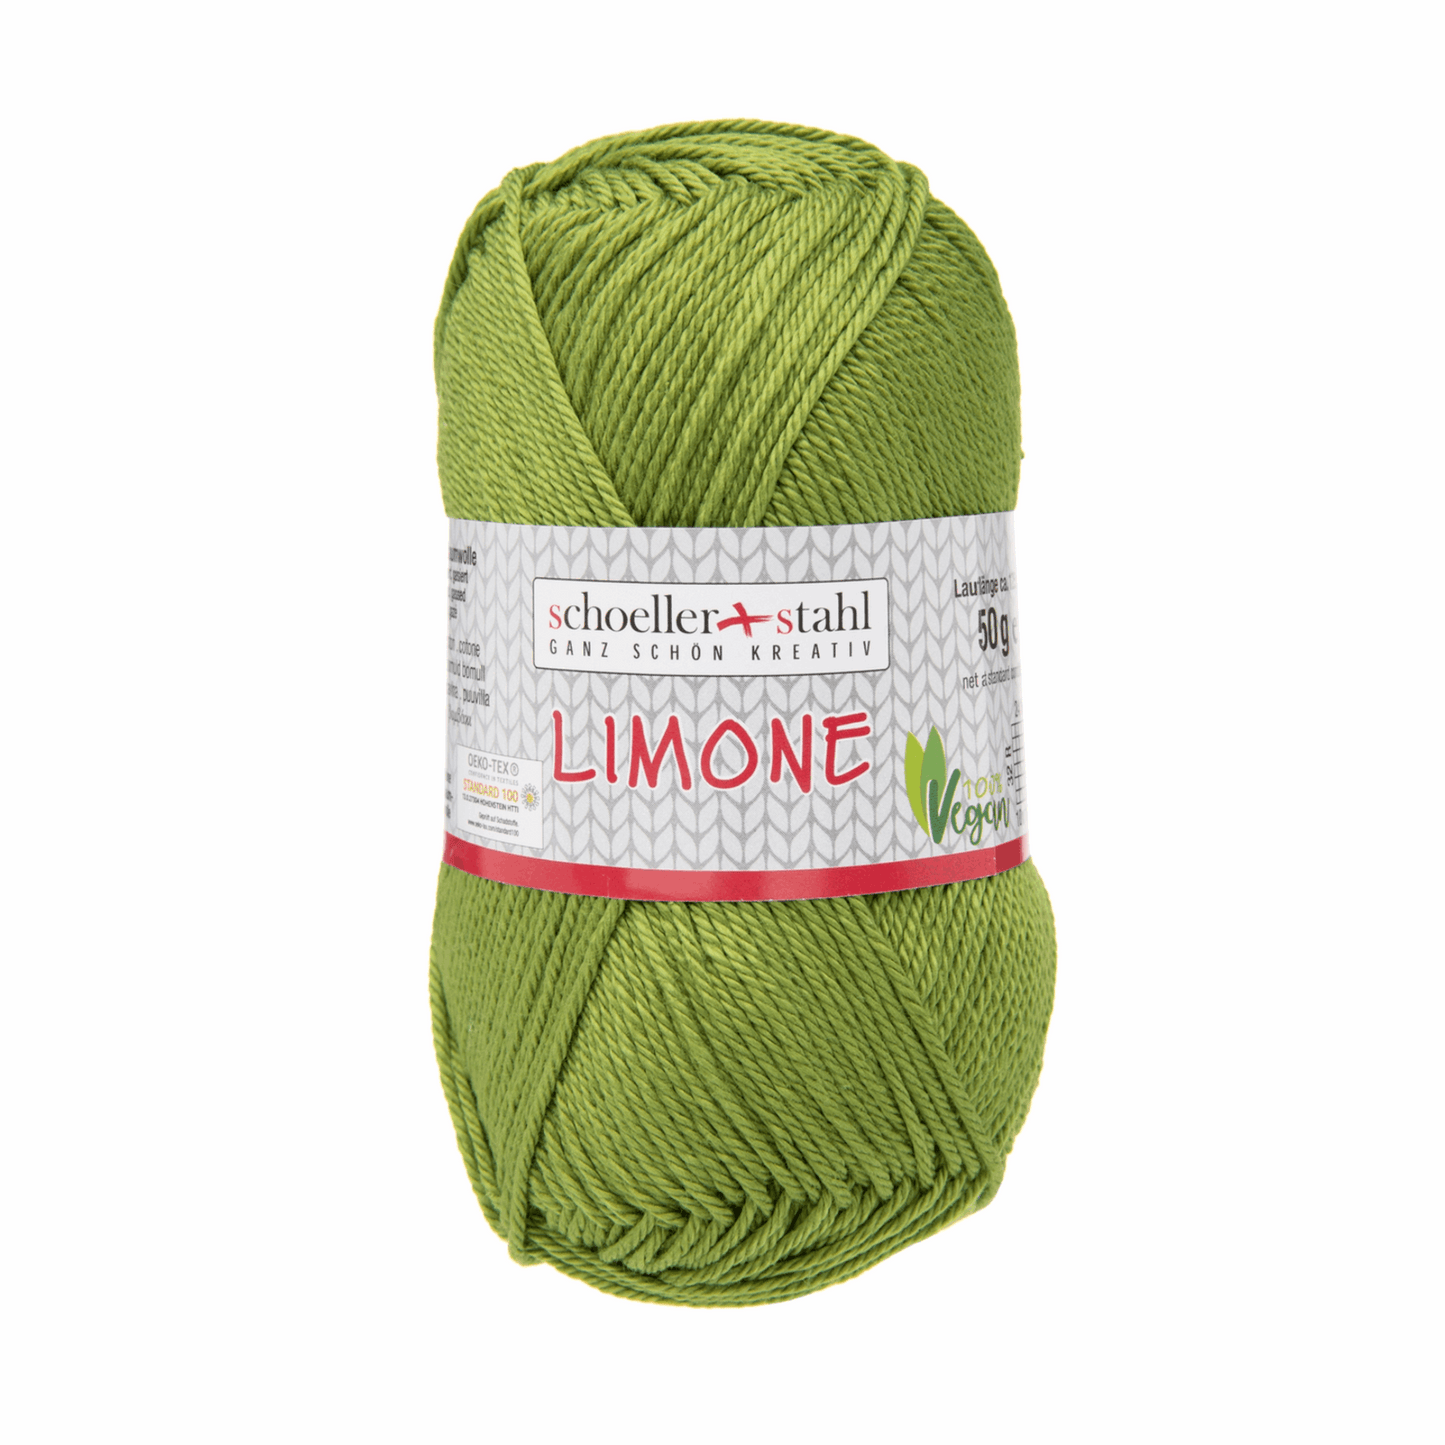 Lime 50g, 90130, color 182, moss